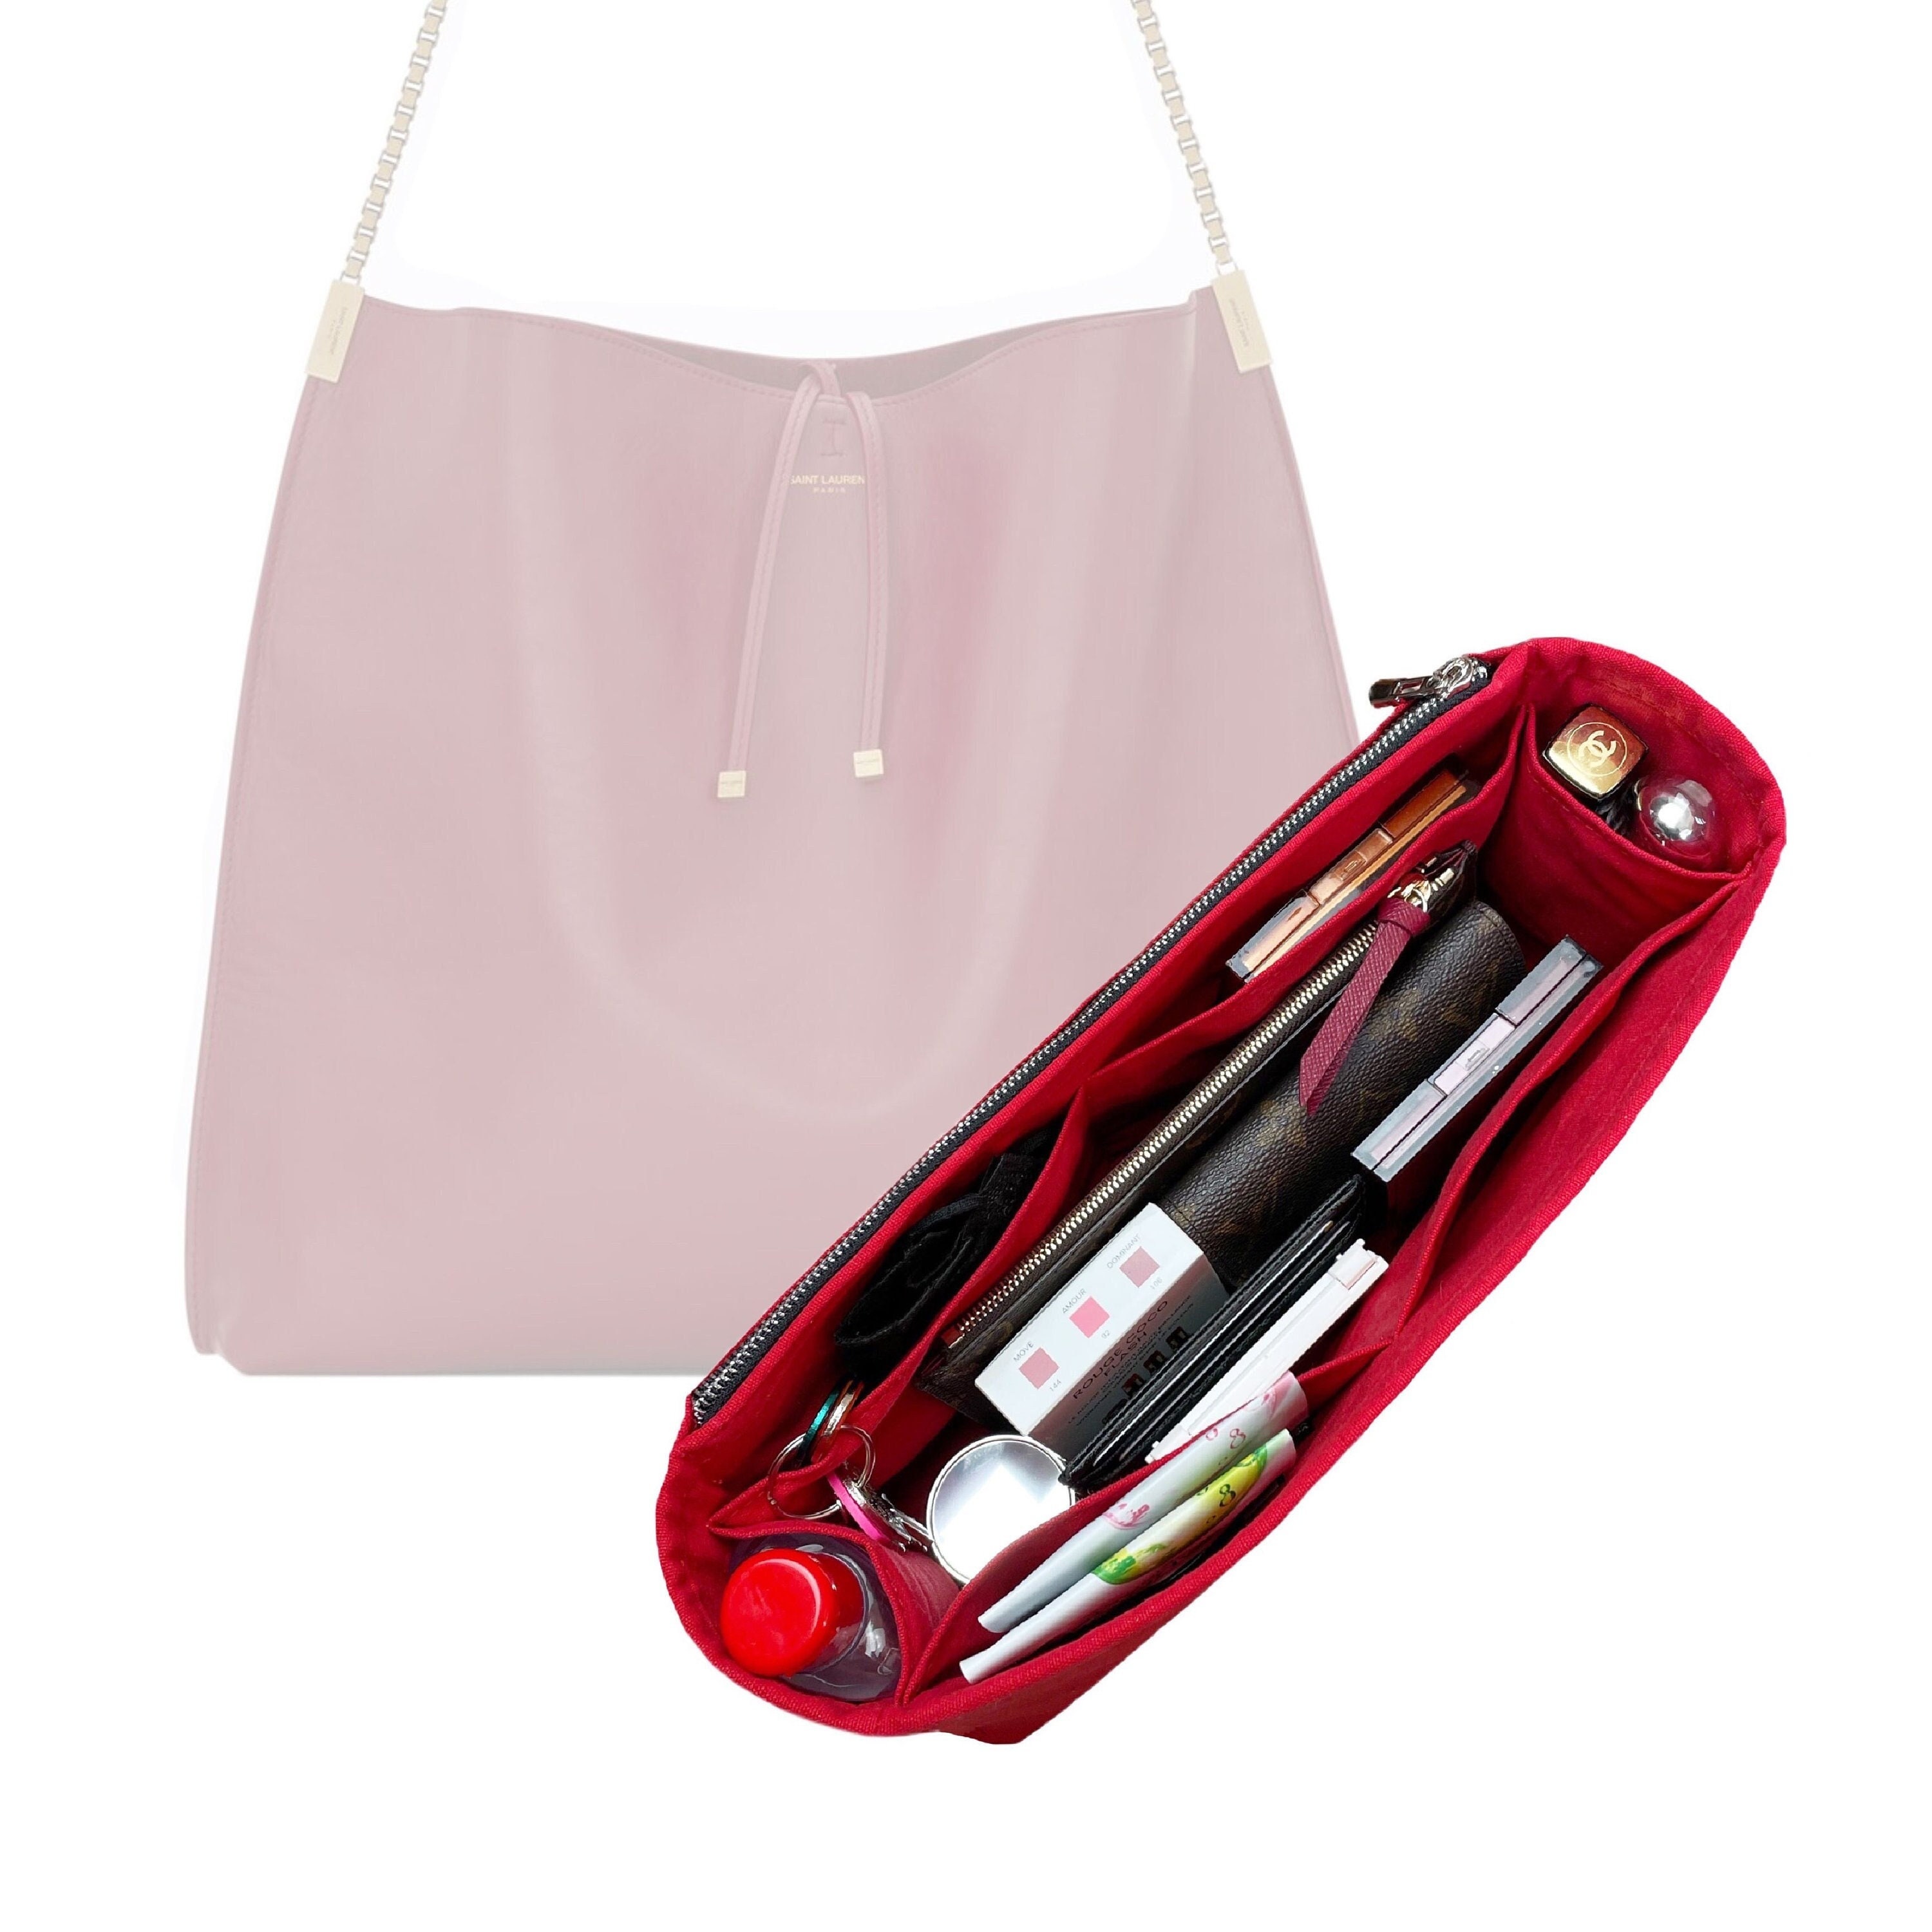 Bag and Purse Organizer with Singular Style for Saint Laurent